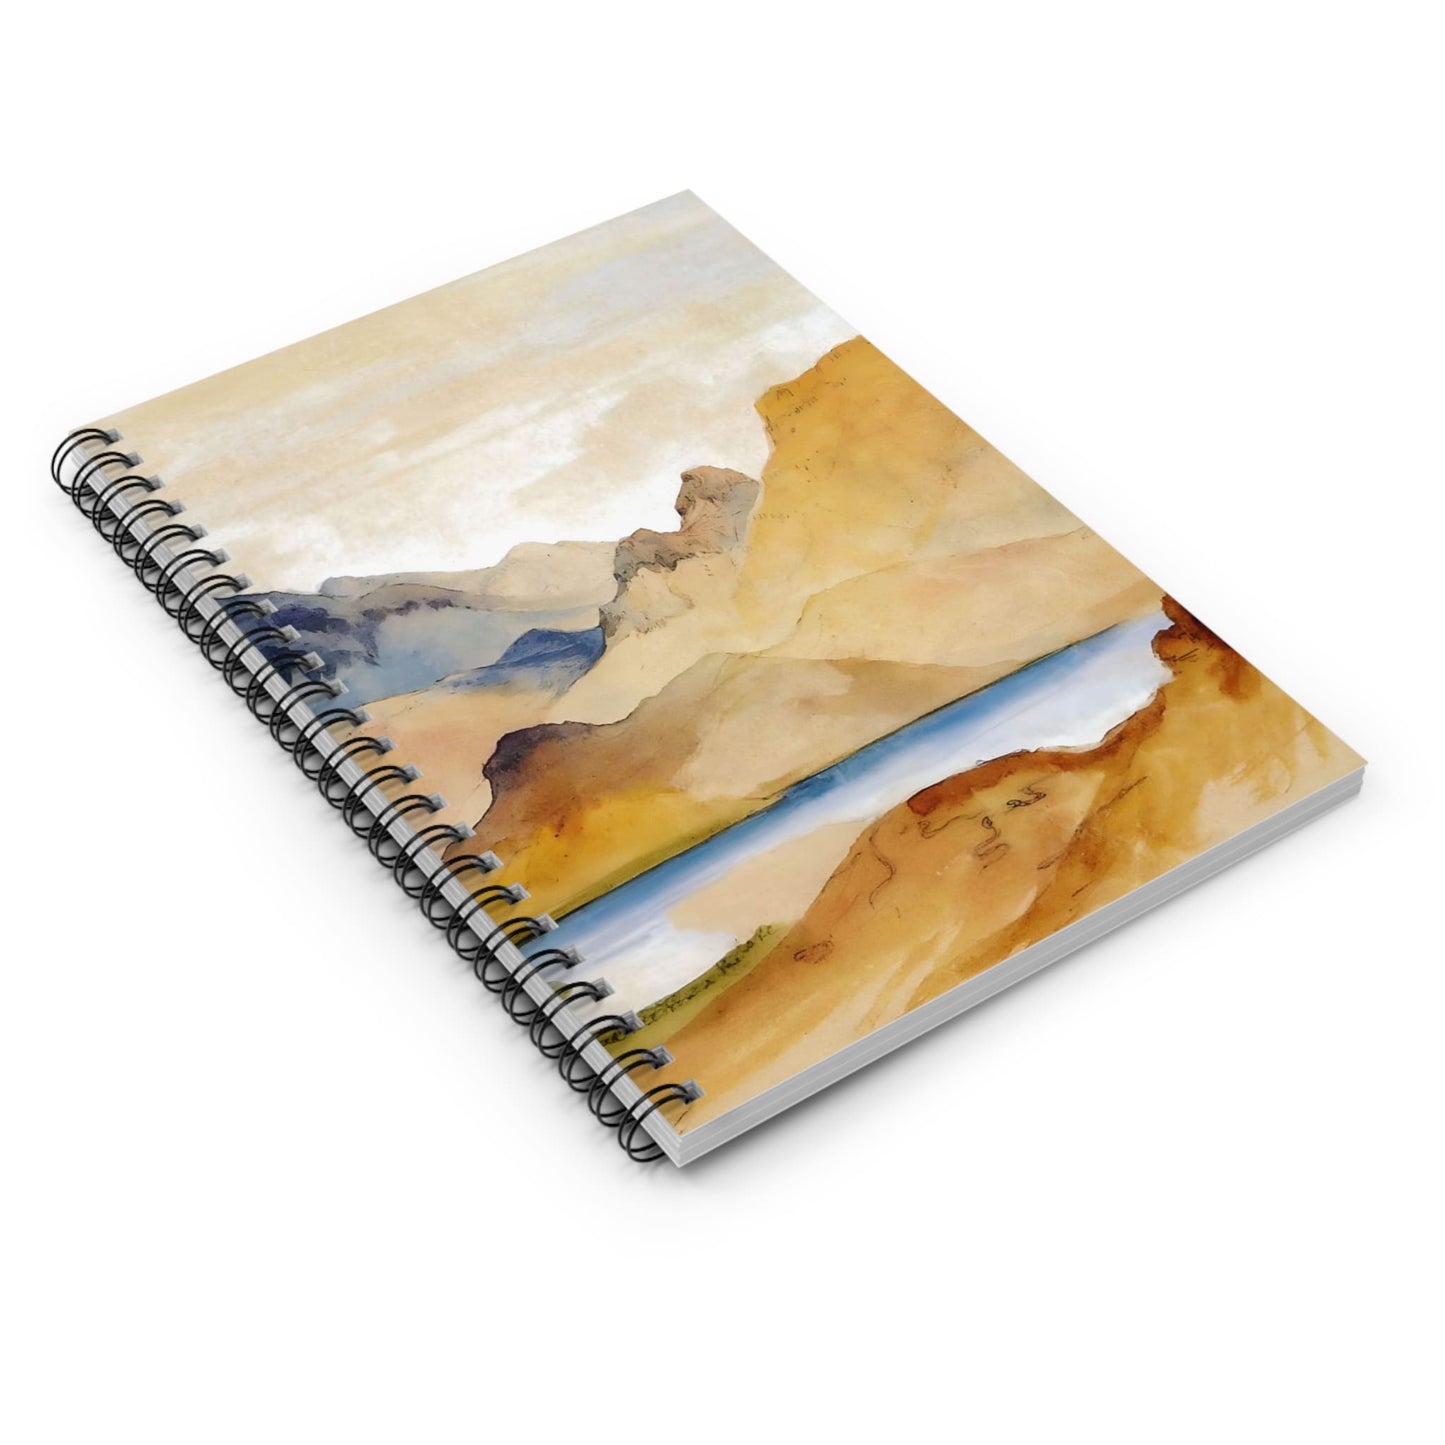 Abstract Mountains Spiral Notebook Laying Flat on White Surface